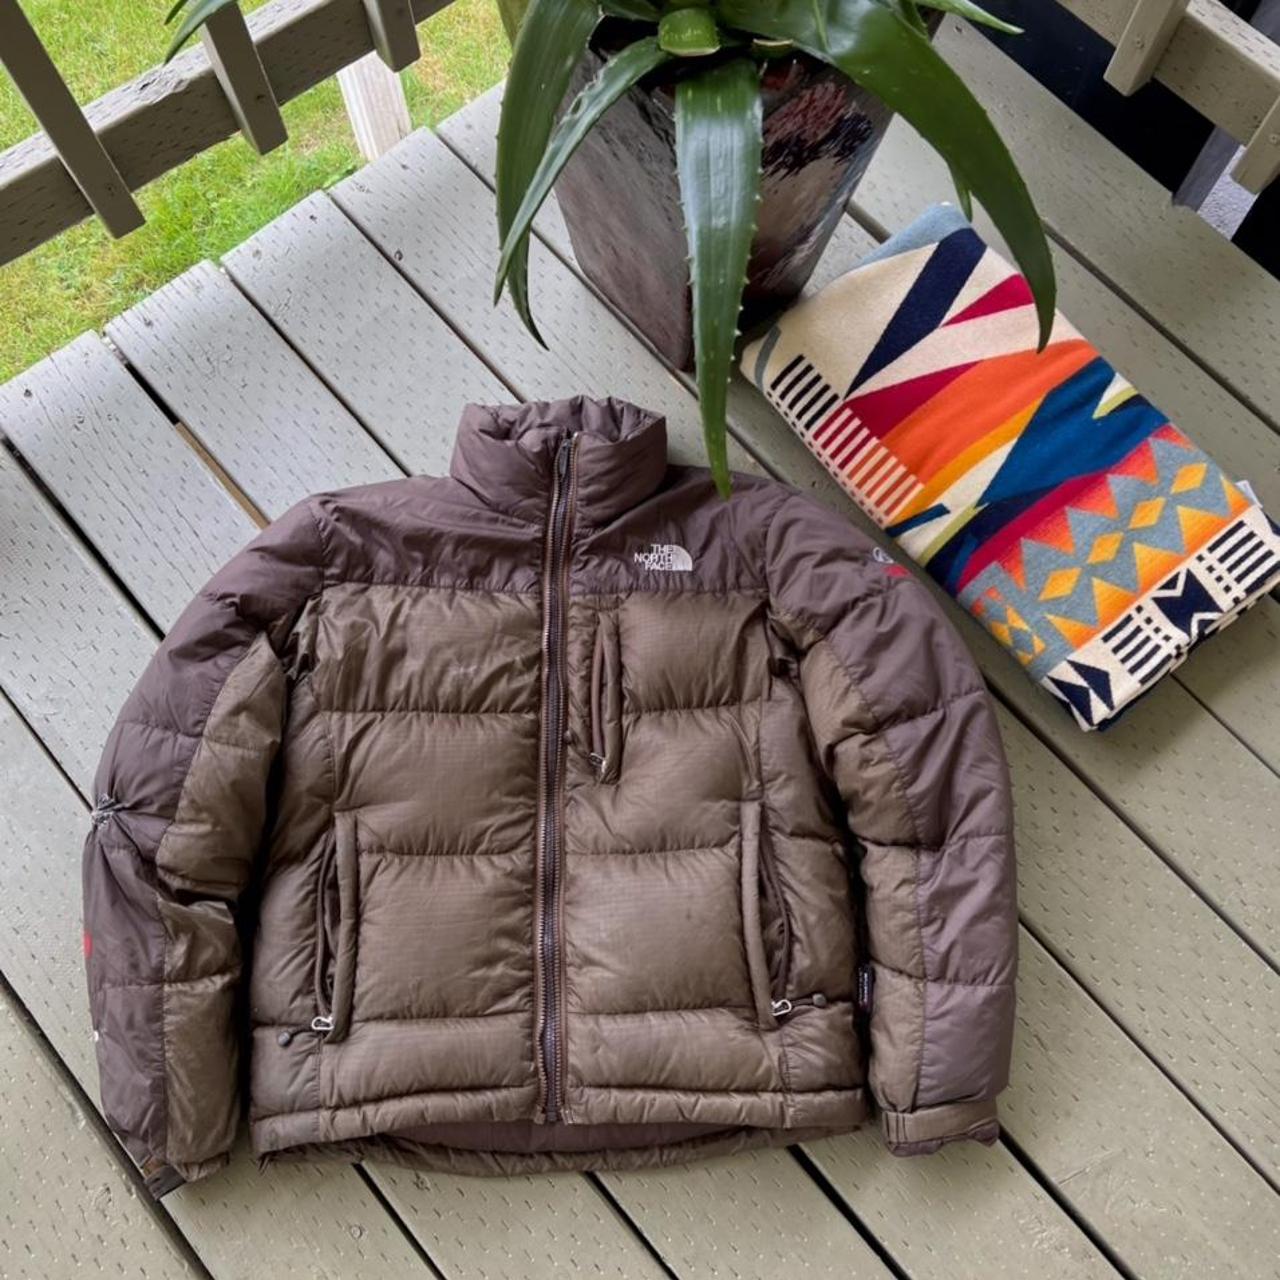 Product Image 2 - Brown north face puffer 700

North